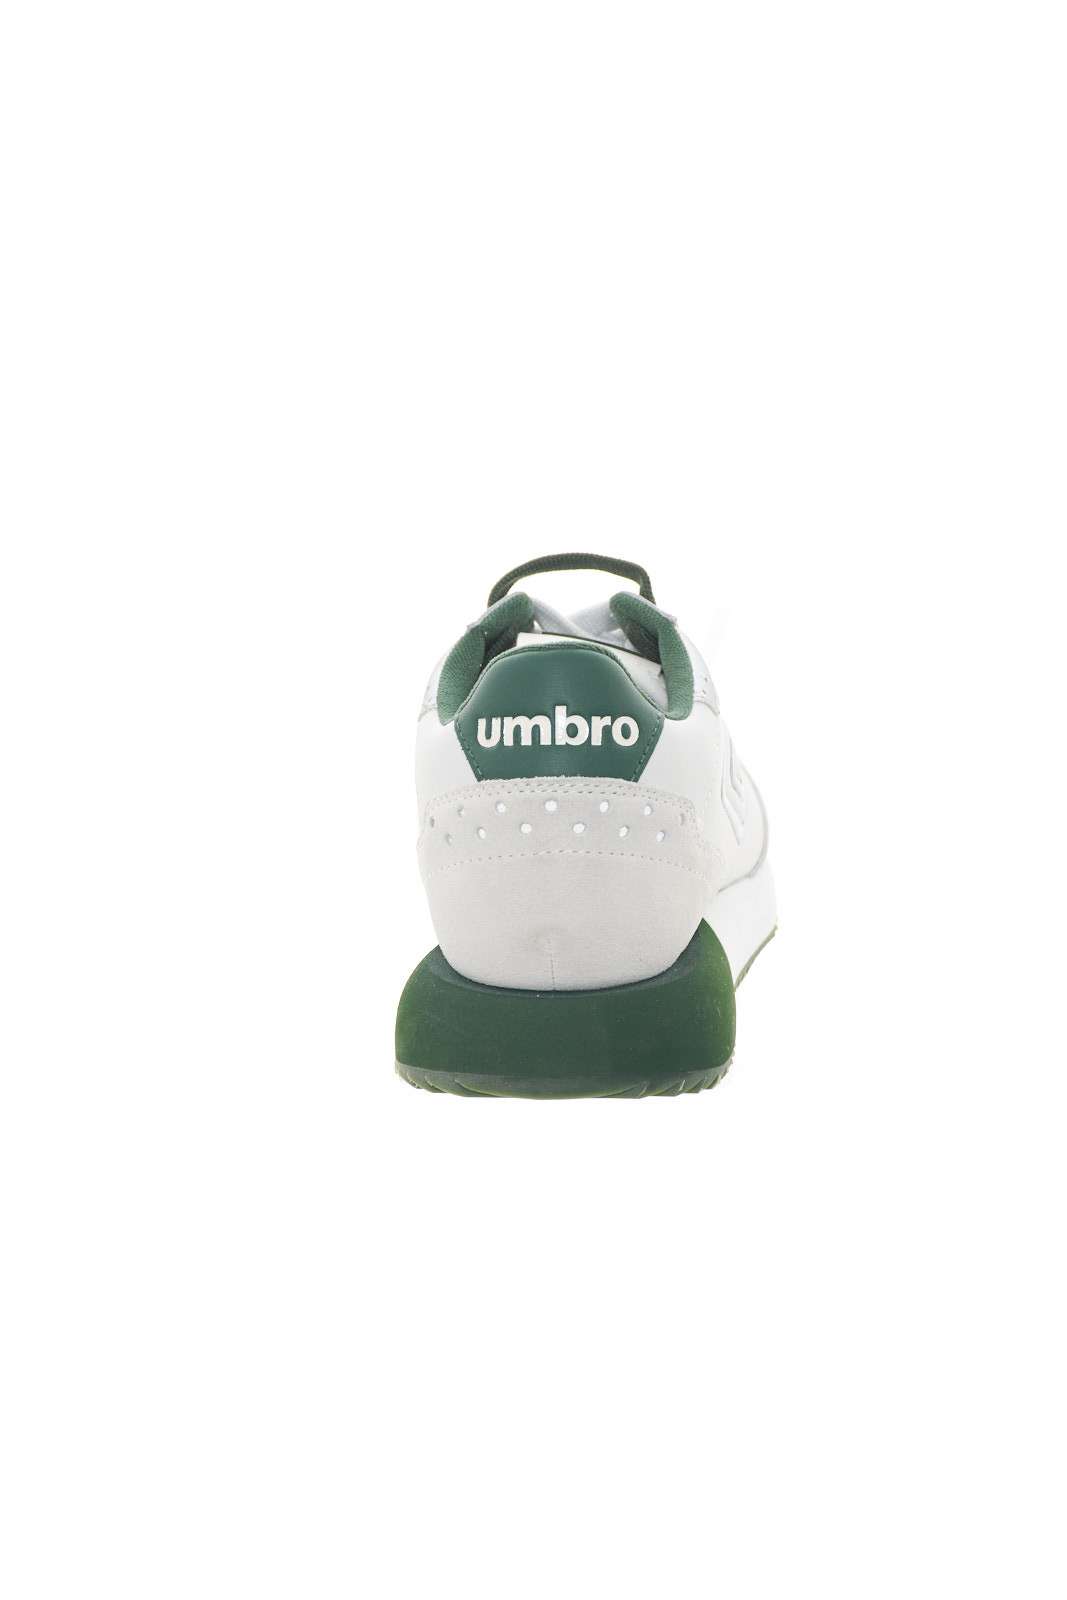 Umbro Women's Sneakers with colored logo